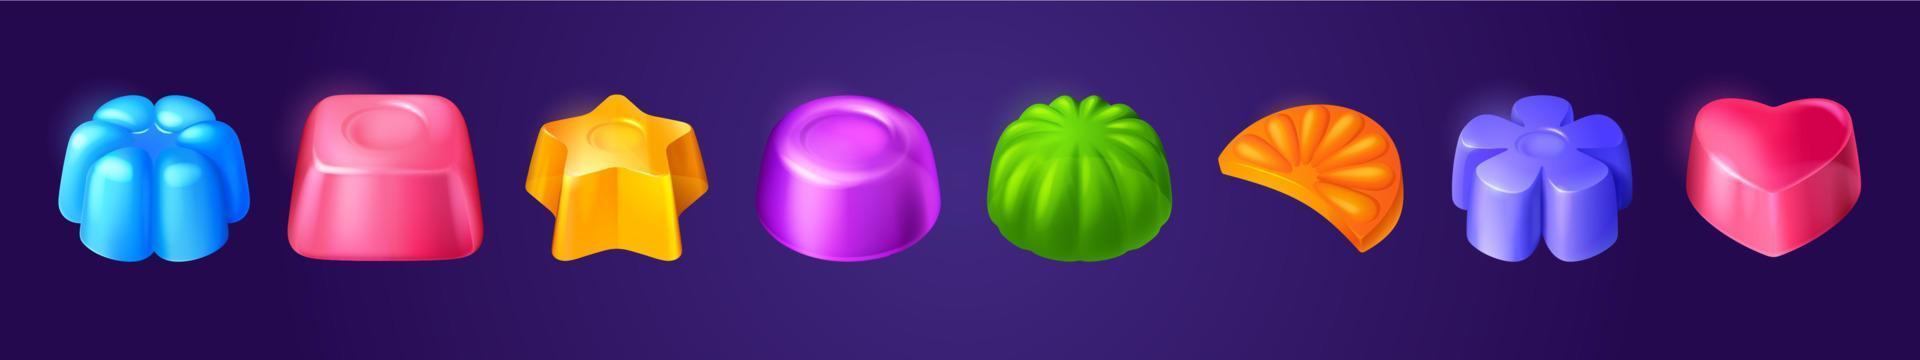 Jelly candies, game icons, ui buttons, assets set vector